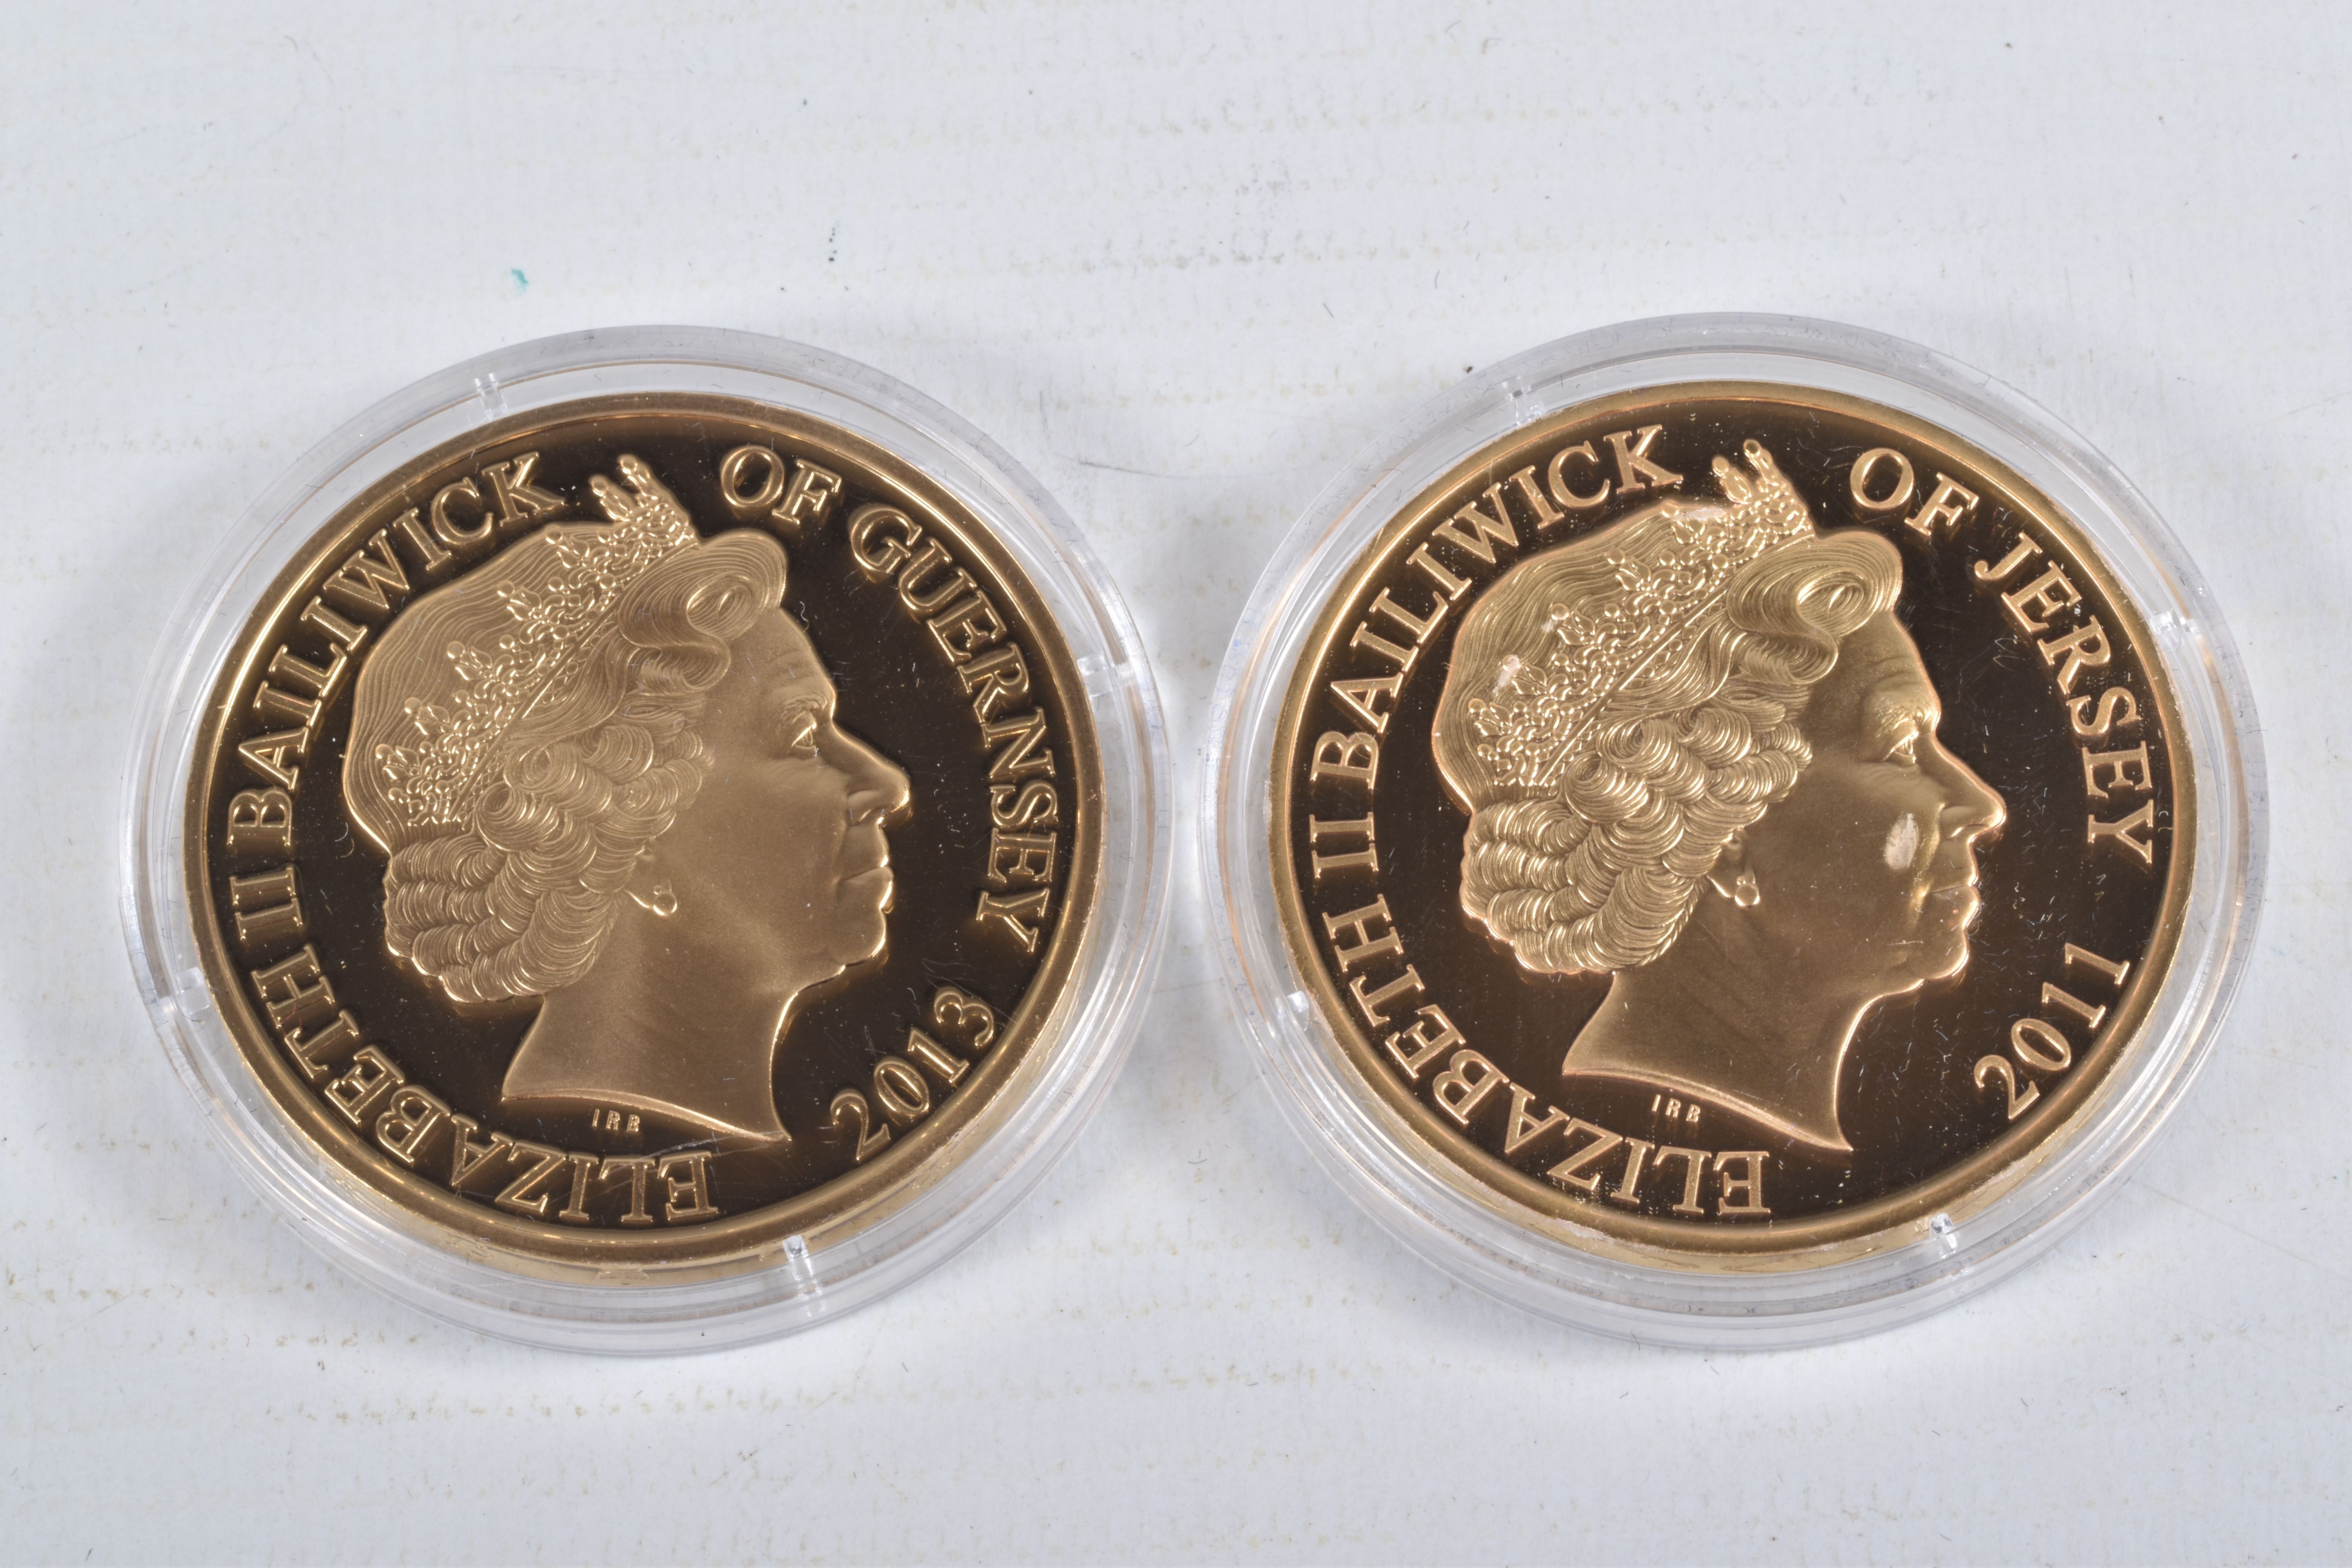 A PACKET CONTAINING SIX QUEEN ELIZABETH II 2011-13 GOLD LAYERED AND PICTORIAL COINS, Jersey, - Image 5 of 7